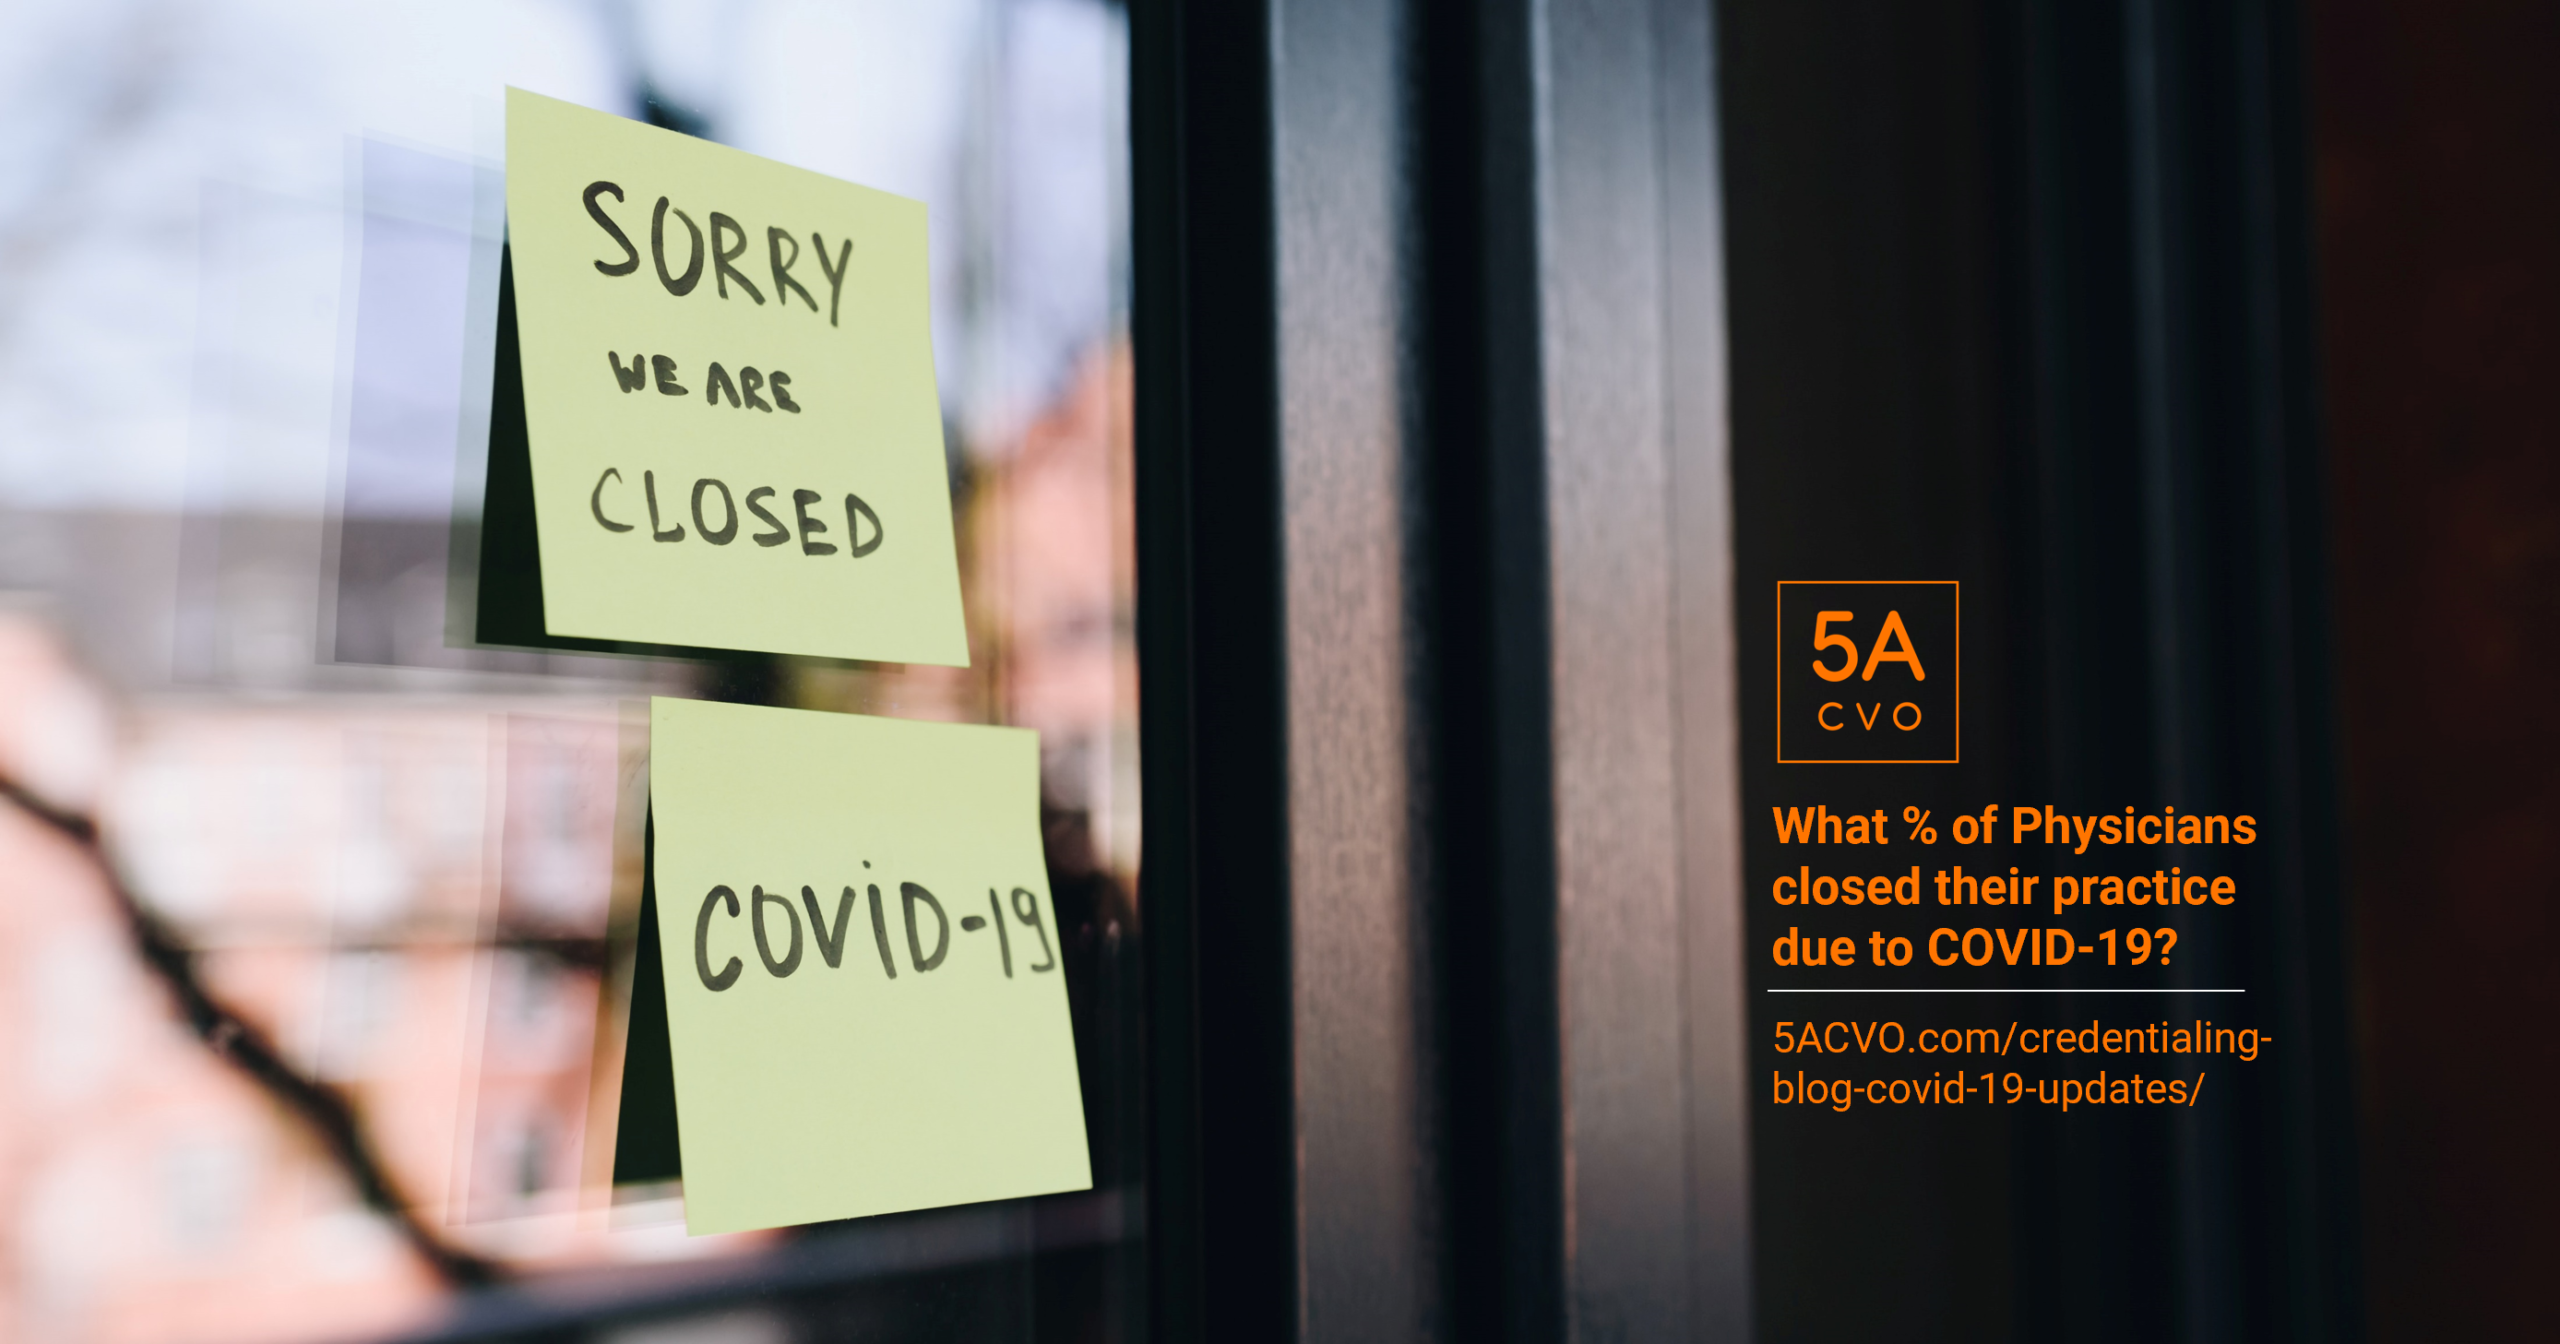 5ACVO.com Physician Practices Have Closed Due to COVID-19